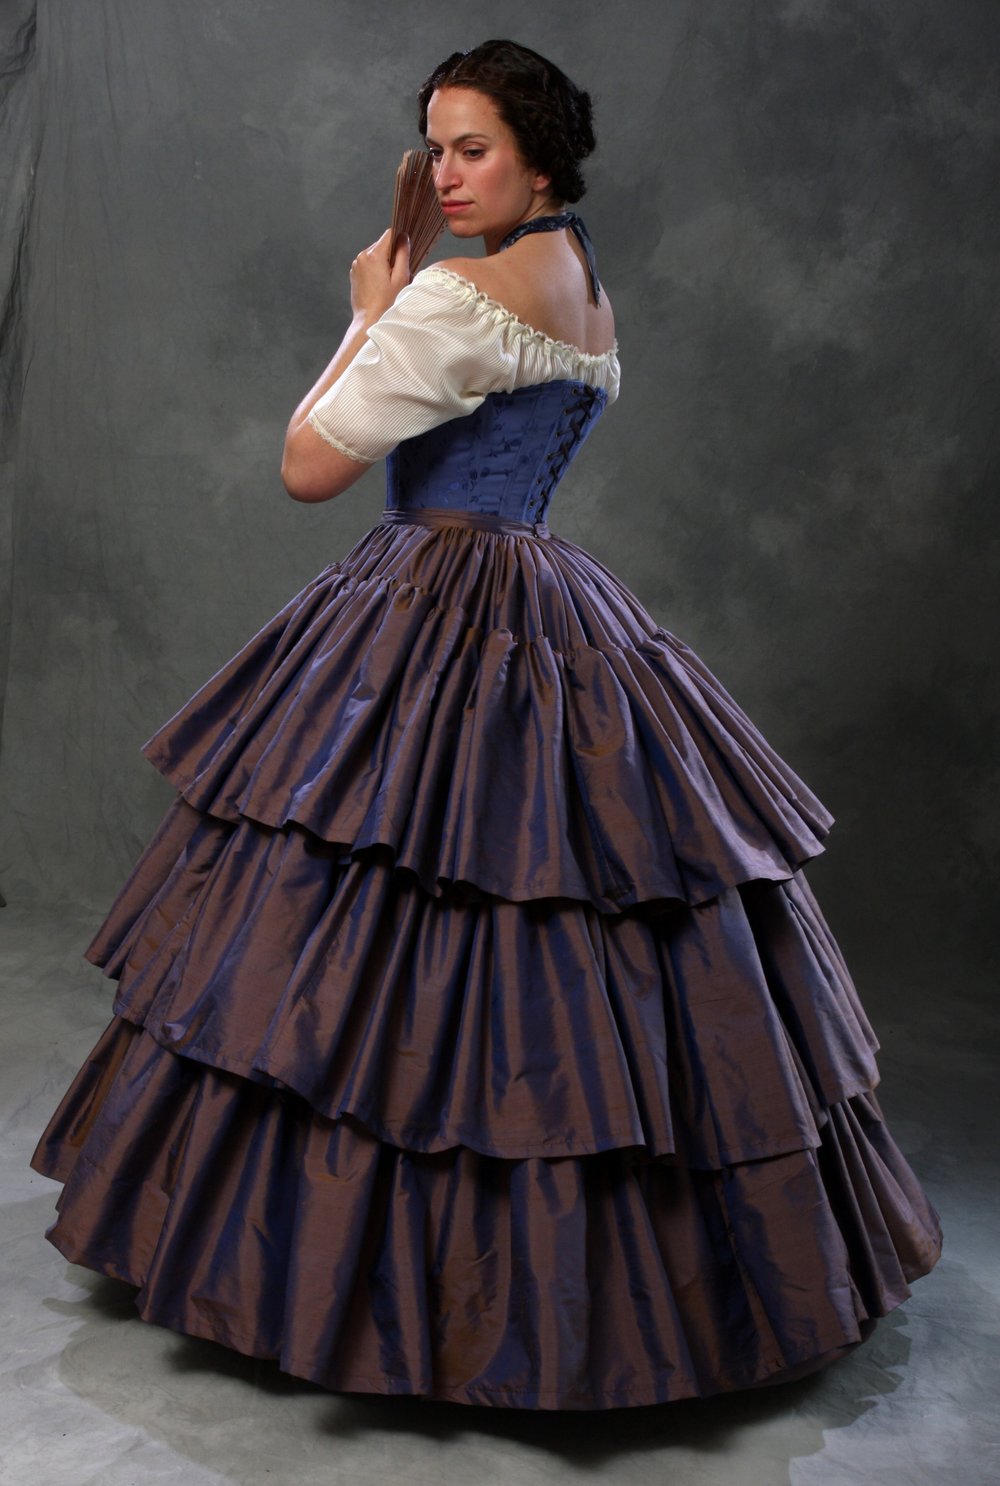 Mid-19th Century Hoop — Period Corsets